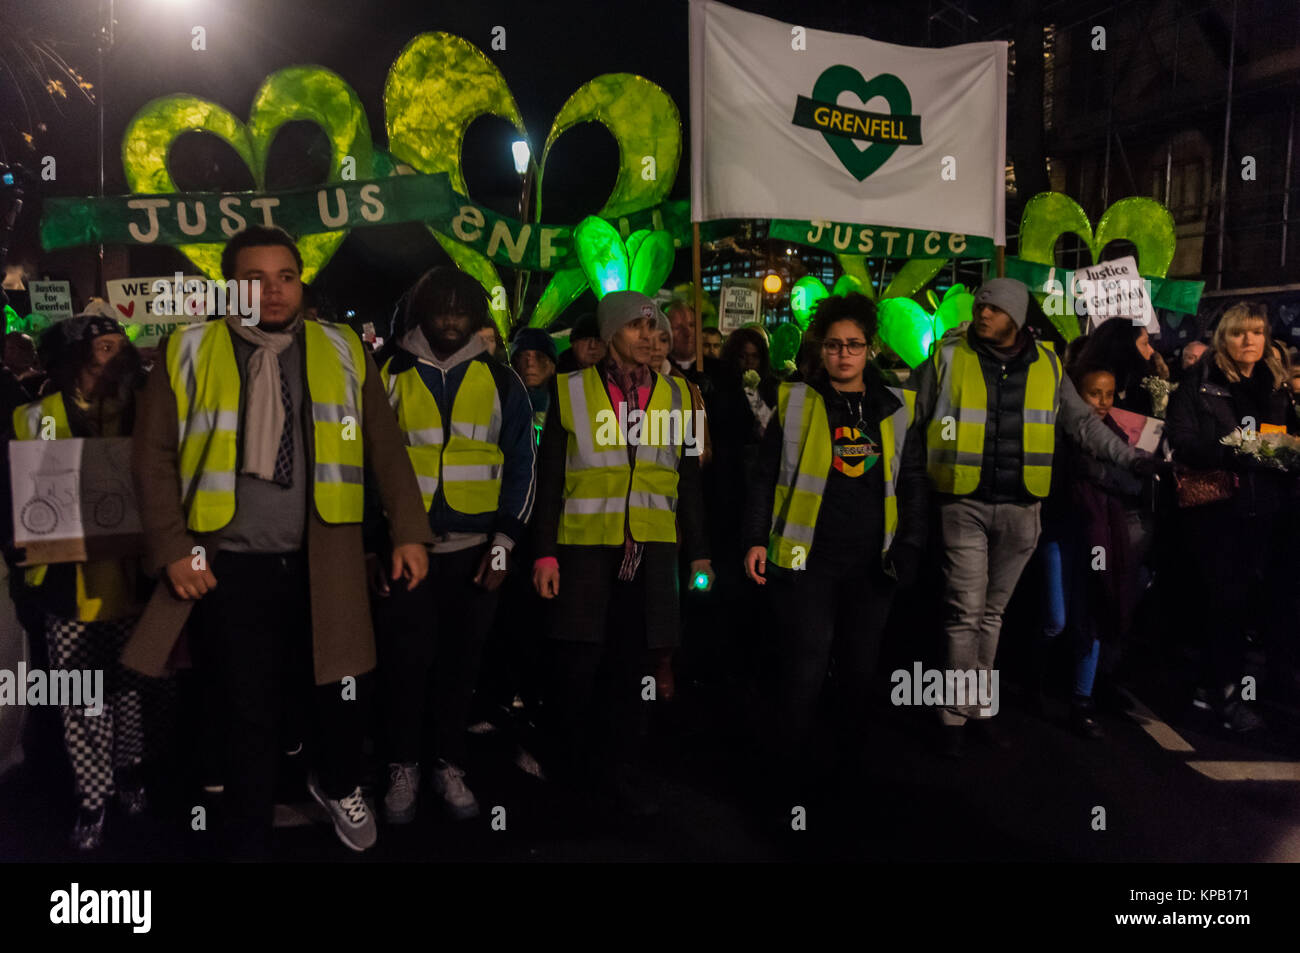 December 14, 2017 - London, UK. 14th December 2017. The monthly slow and silent walk to demand justice and remember those killed at Grenfell Tower starts from Notting Hill Methodist Church on the 6 month anniversary of the tragic fire. The families of those who died and survivors made homeless by the fire marched at the front, together with local clergy. Many carried pictures of the victims and flowers, as well as green lights and green heart-shaped symbols. Placards and posters called for Justice for Grenfell, which many fear the official inquiry will fail to provide. I left the procession a Stock Photo